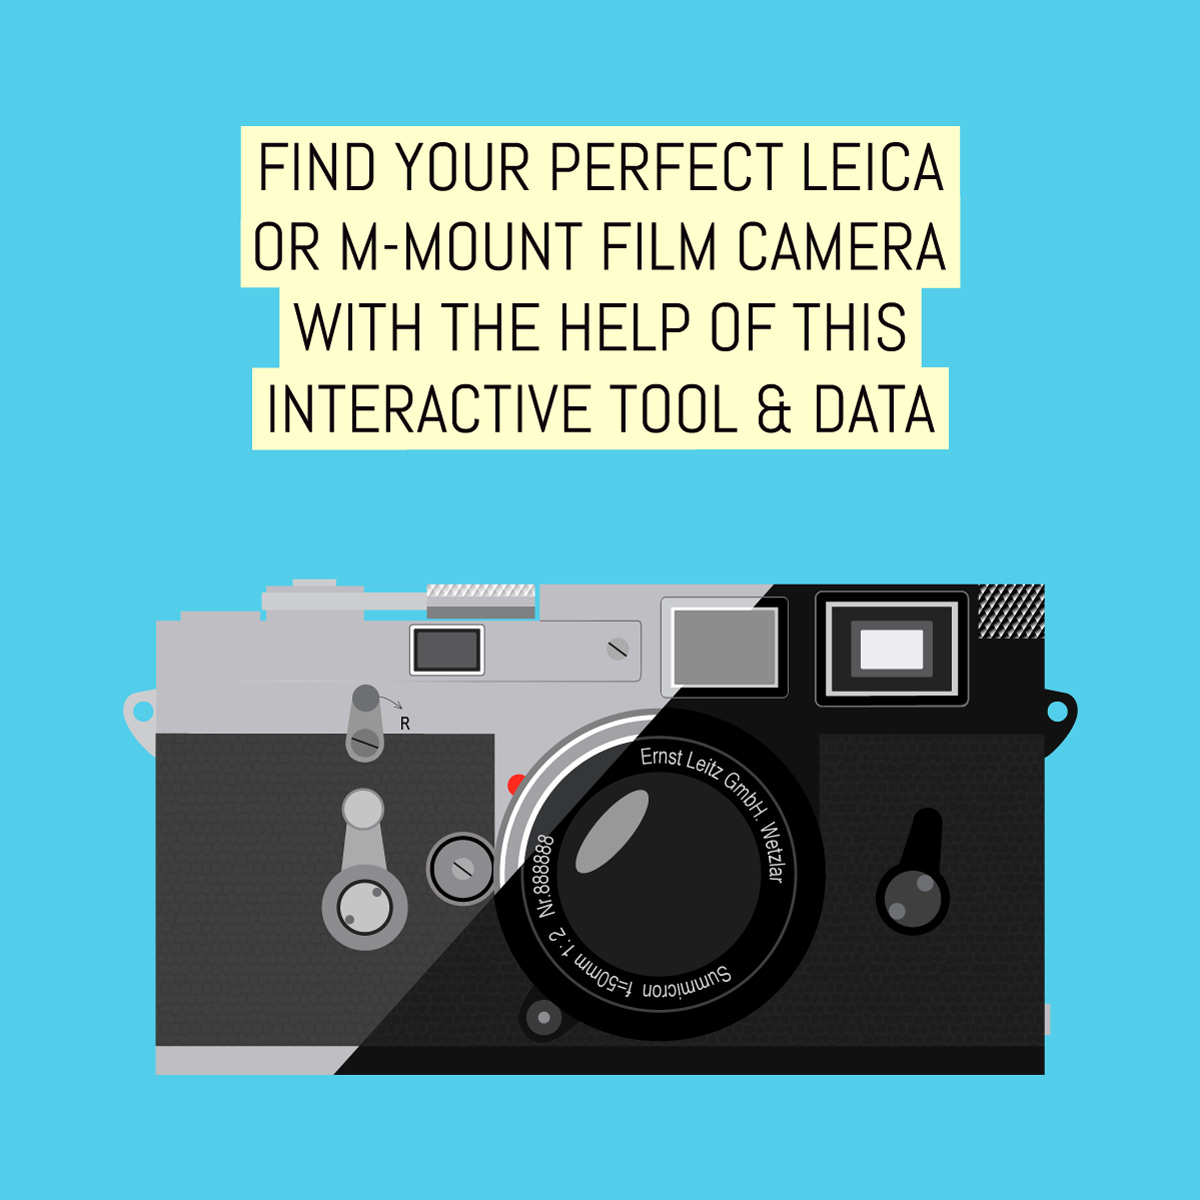 Find your perfect Leica or M-mount film camera with the help of this interactive tool & reference data